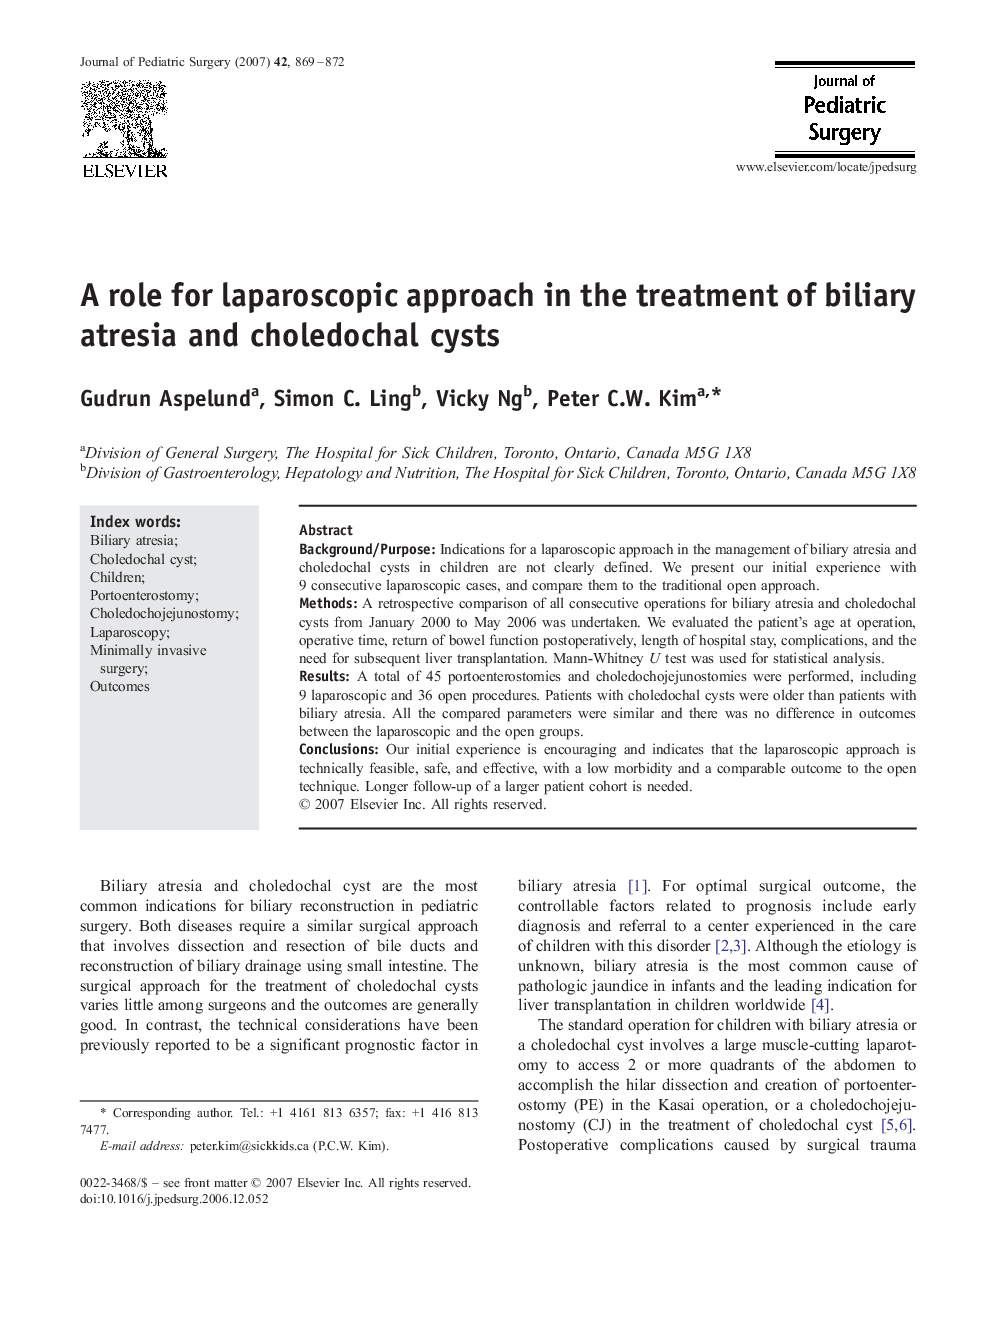 A role for laparoscopic approach in the treatment of biliary atresia and choledochal cysts